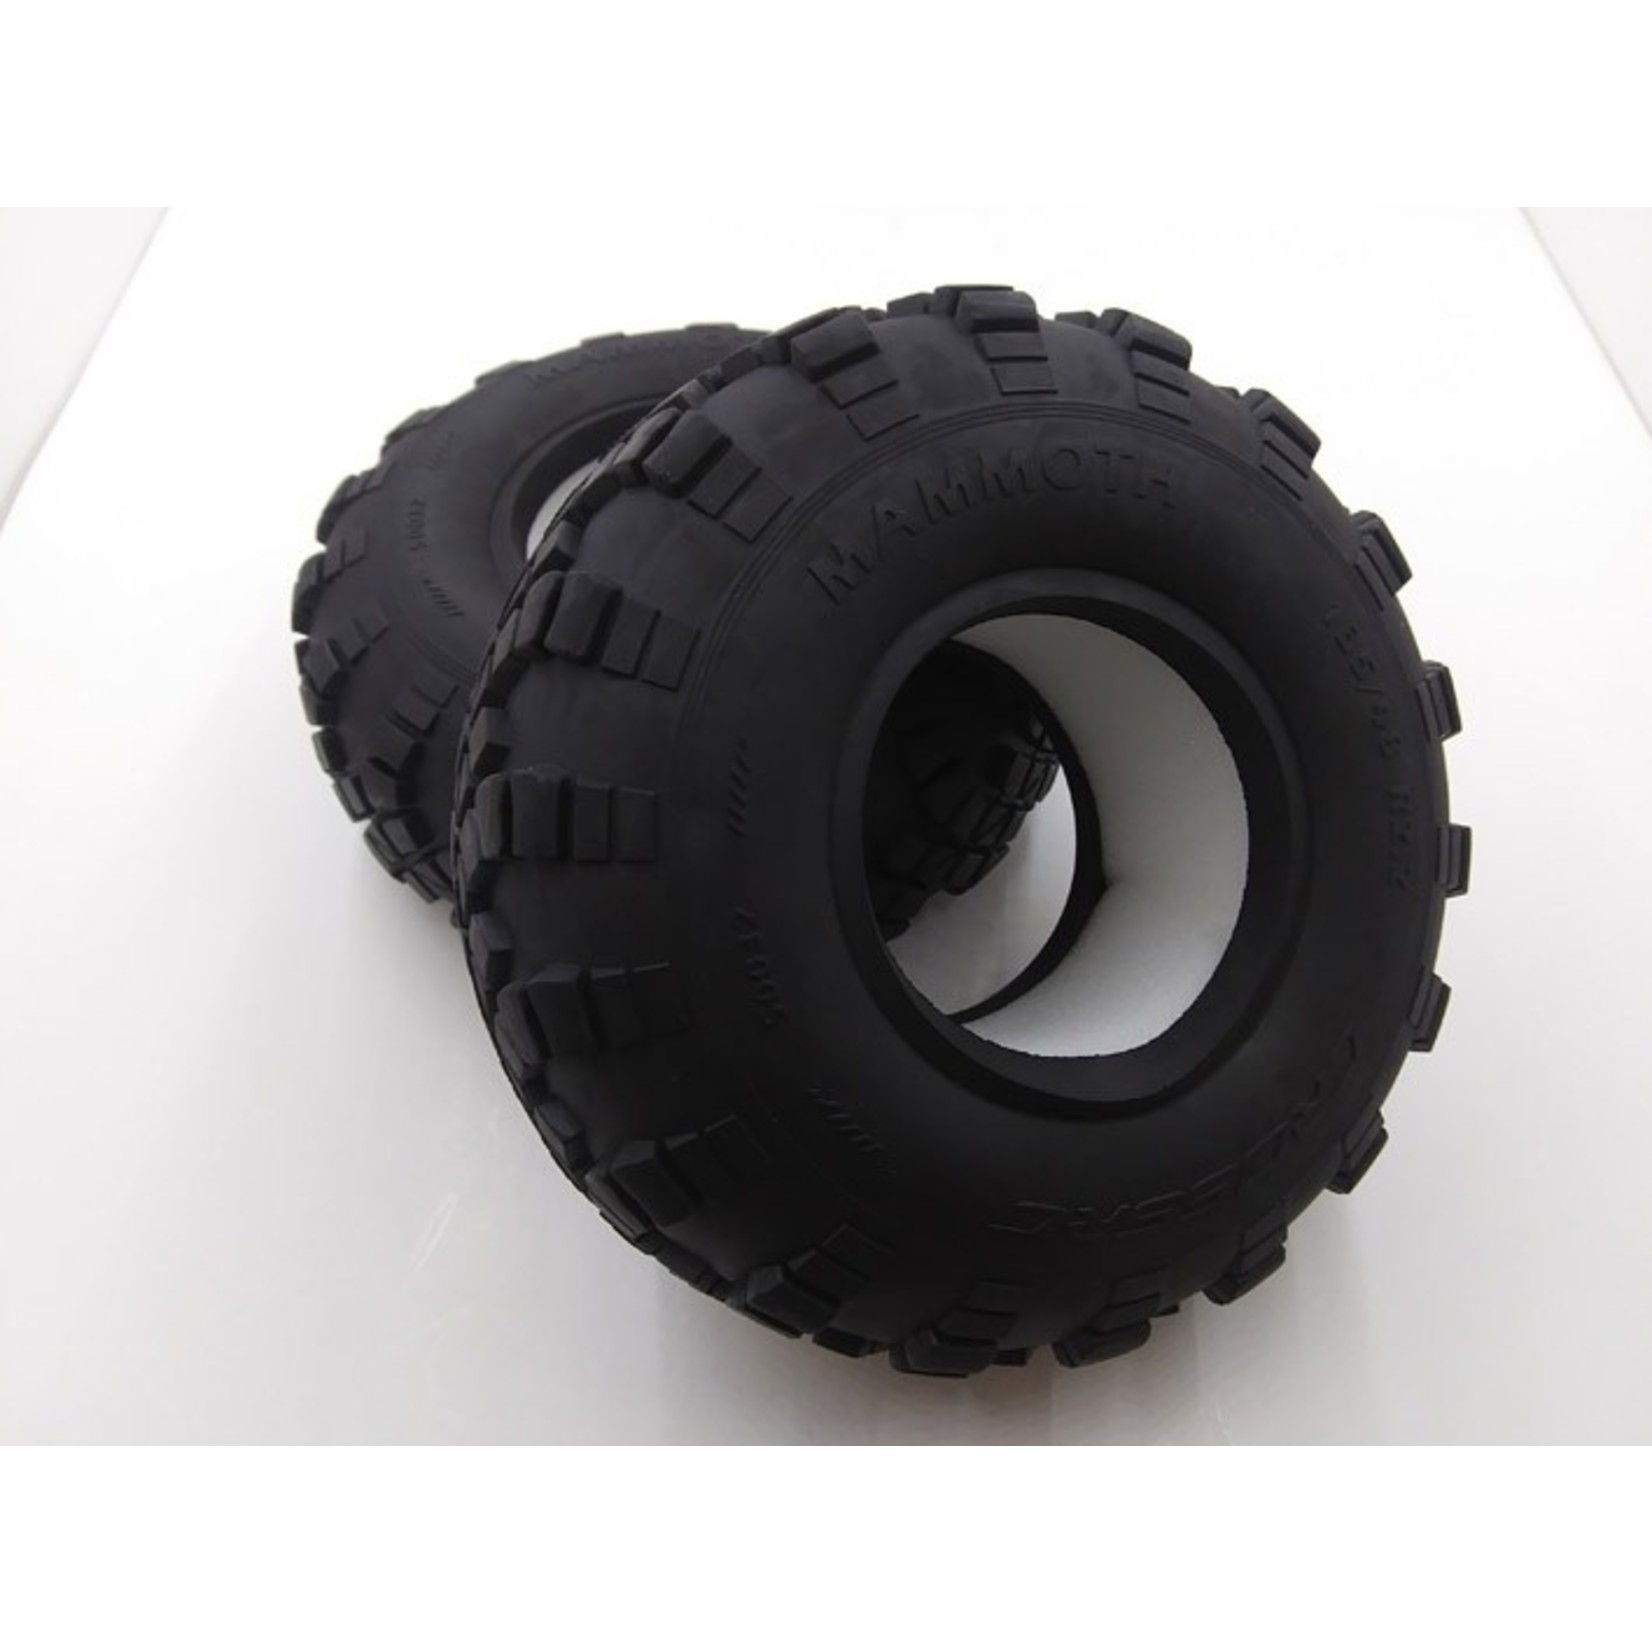 Cross RC Tires with Foam Inserts (pr.):